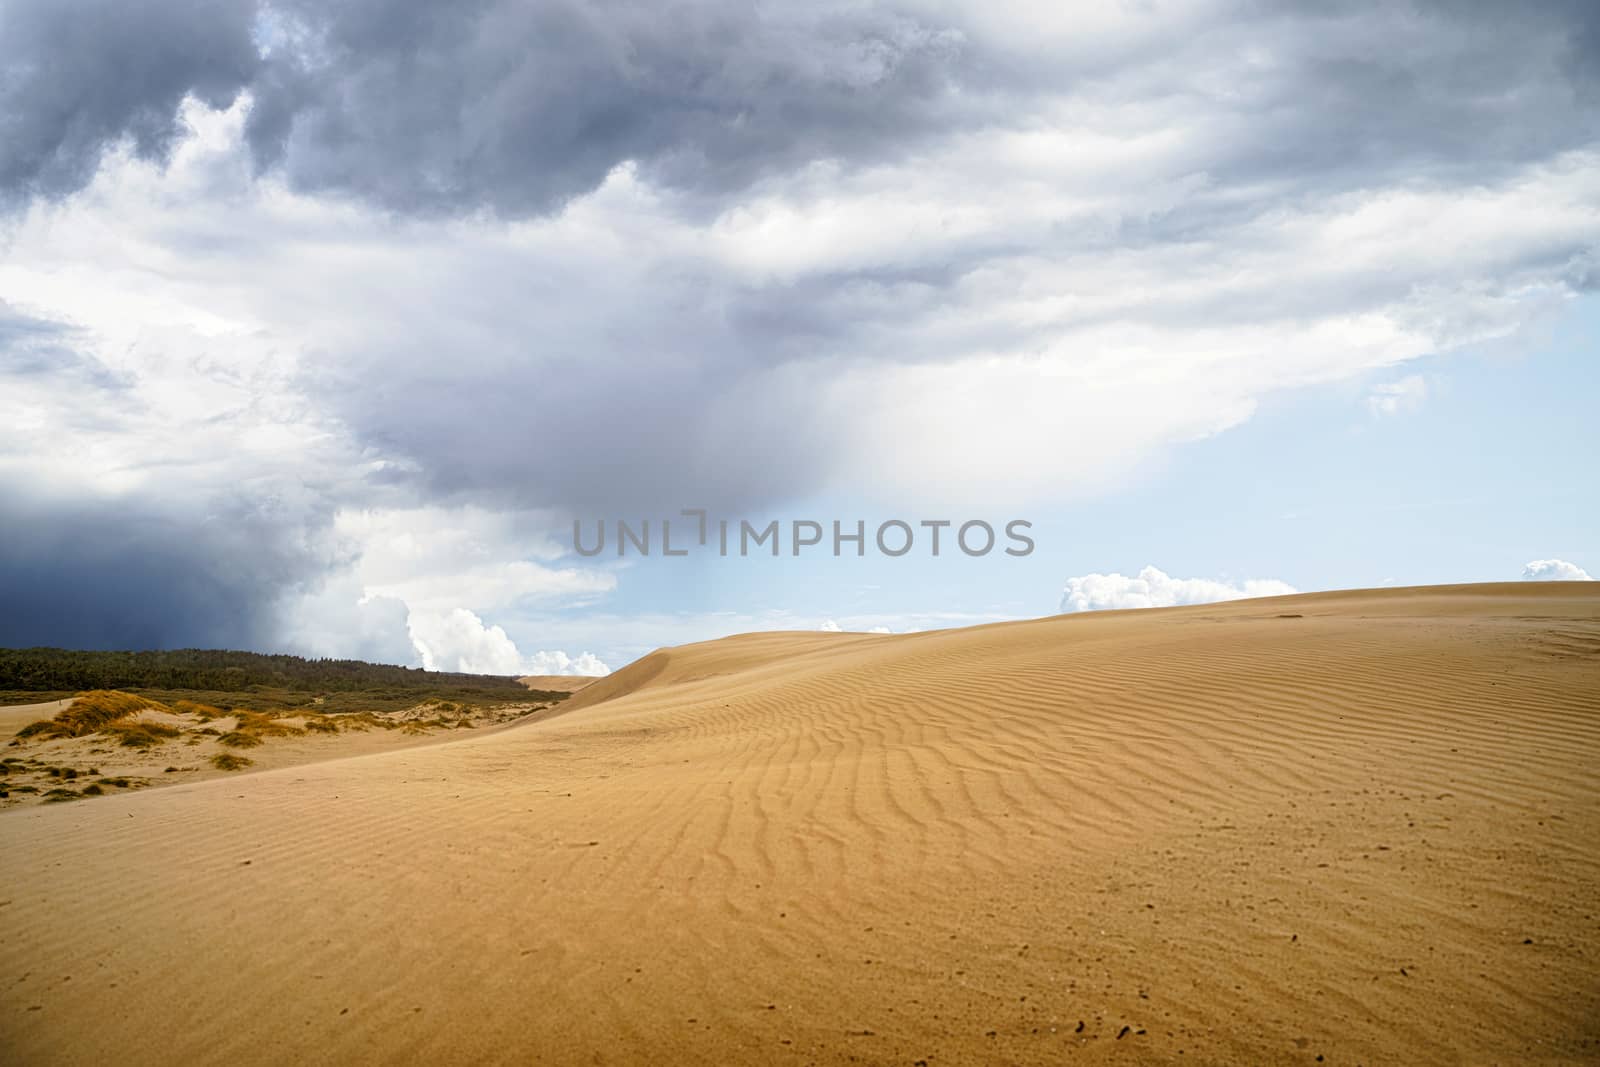 Sand dune in a desert with dark clouds coming in over the dry land